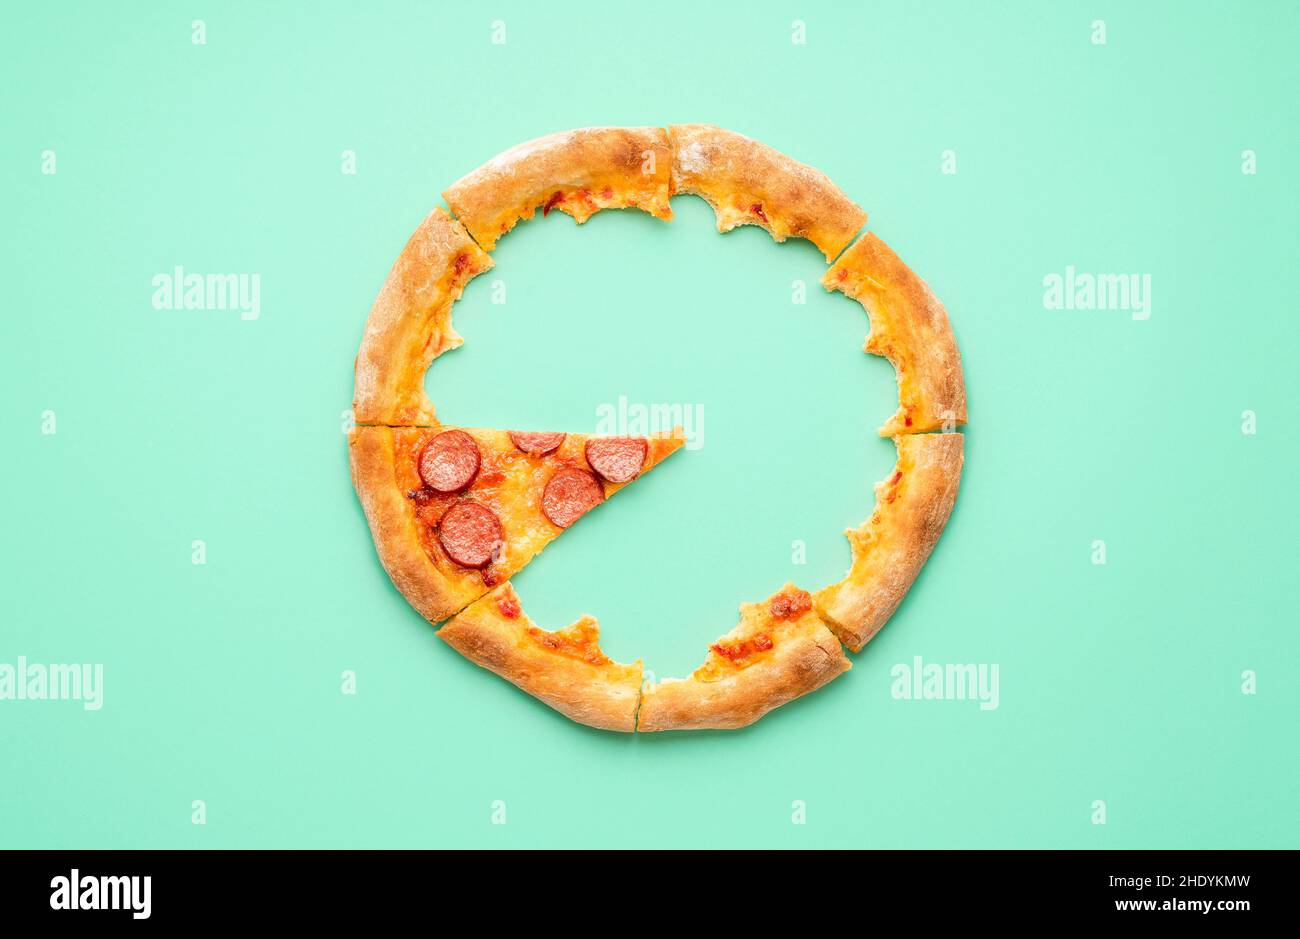 remains, pizza, remain, pizzas Stock Photo